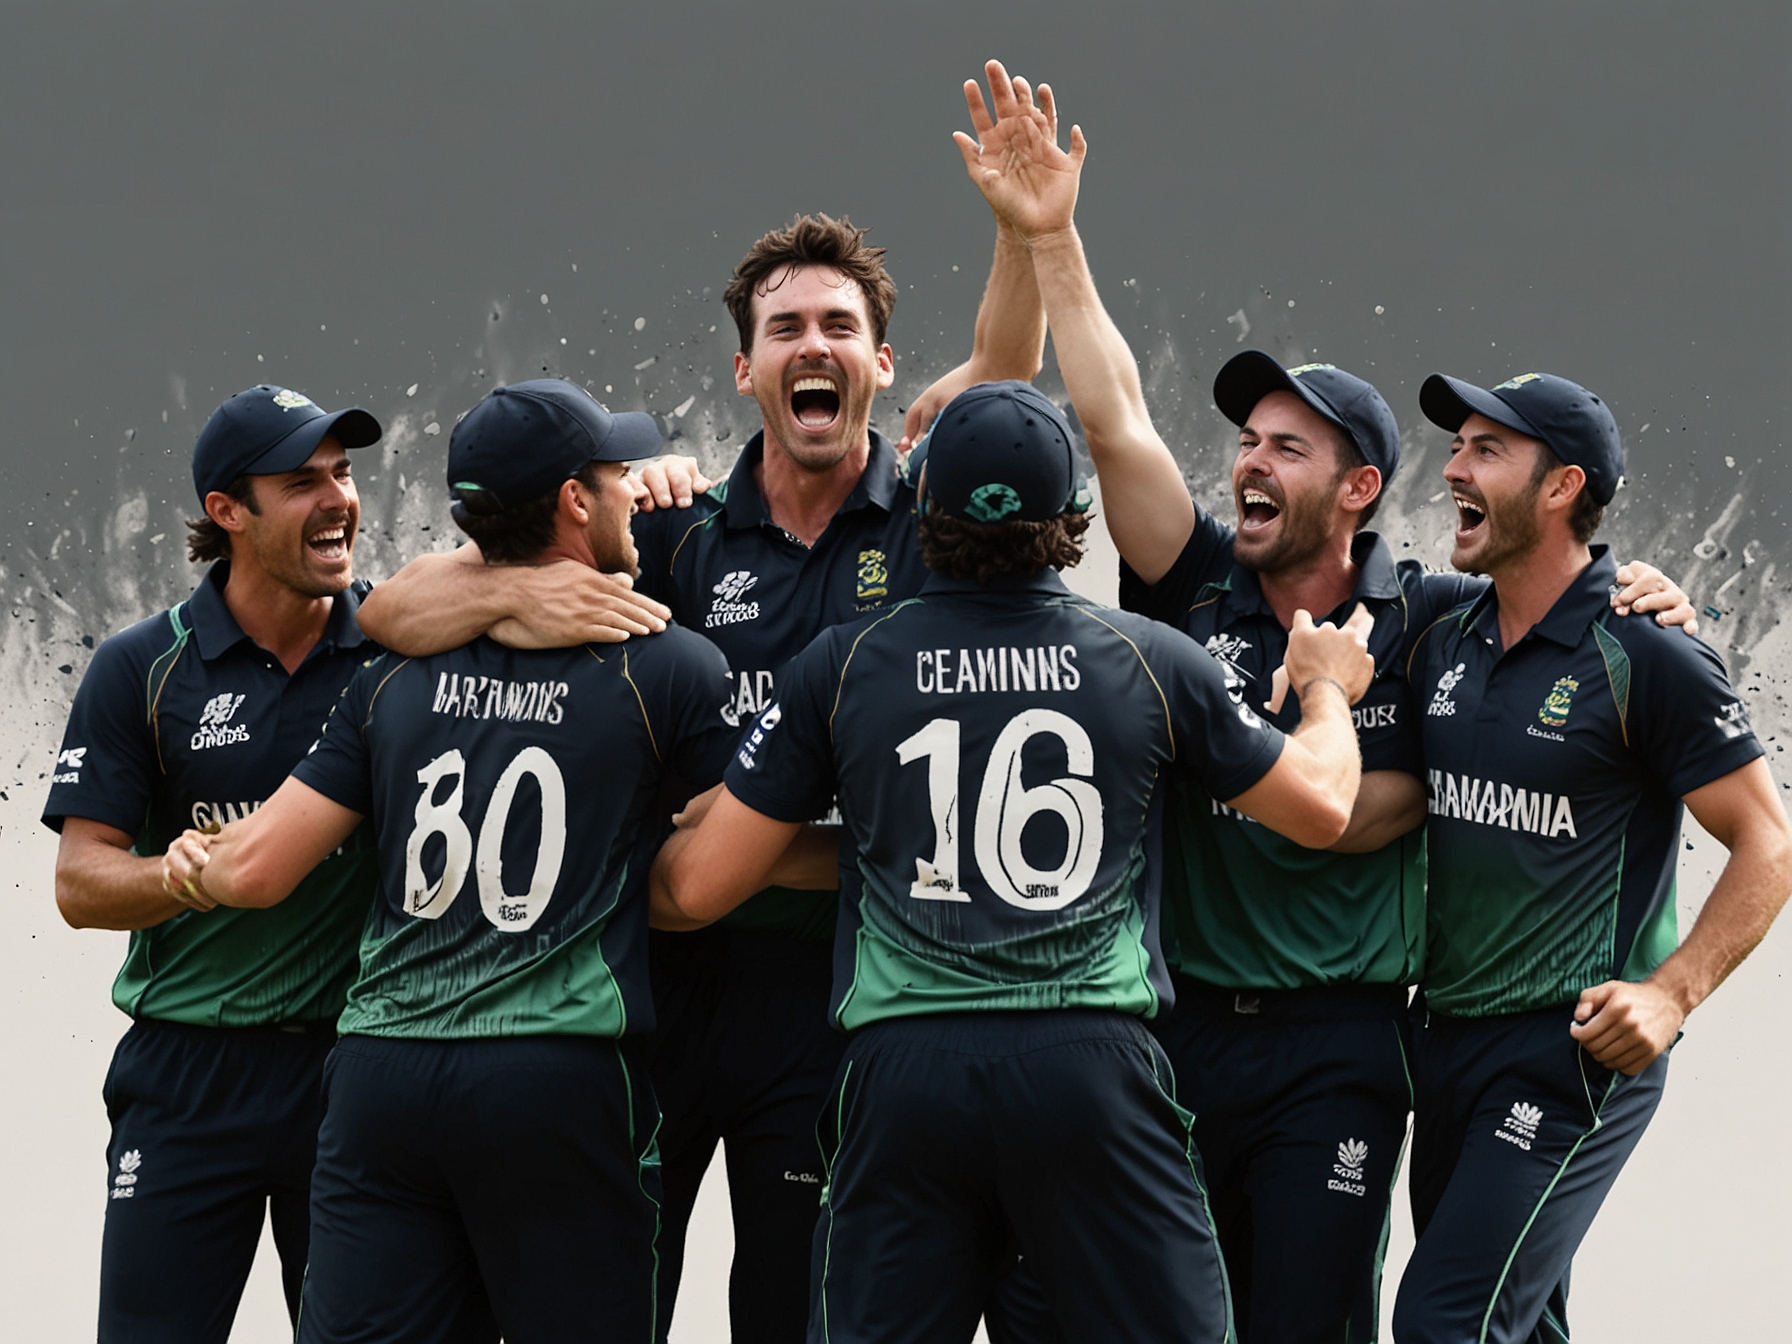 A celebratory image featuring Pat Cummins with his teammates, highlighting the joy and camaraderie after securing a crucial victory in the T20 World Cup match against Bangladesh.